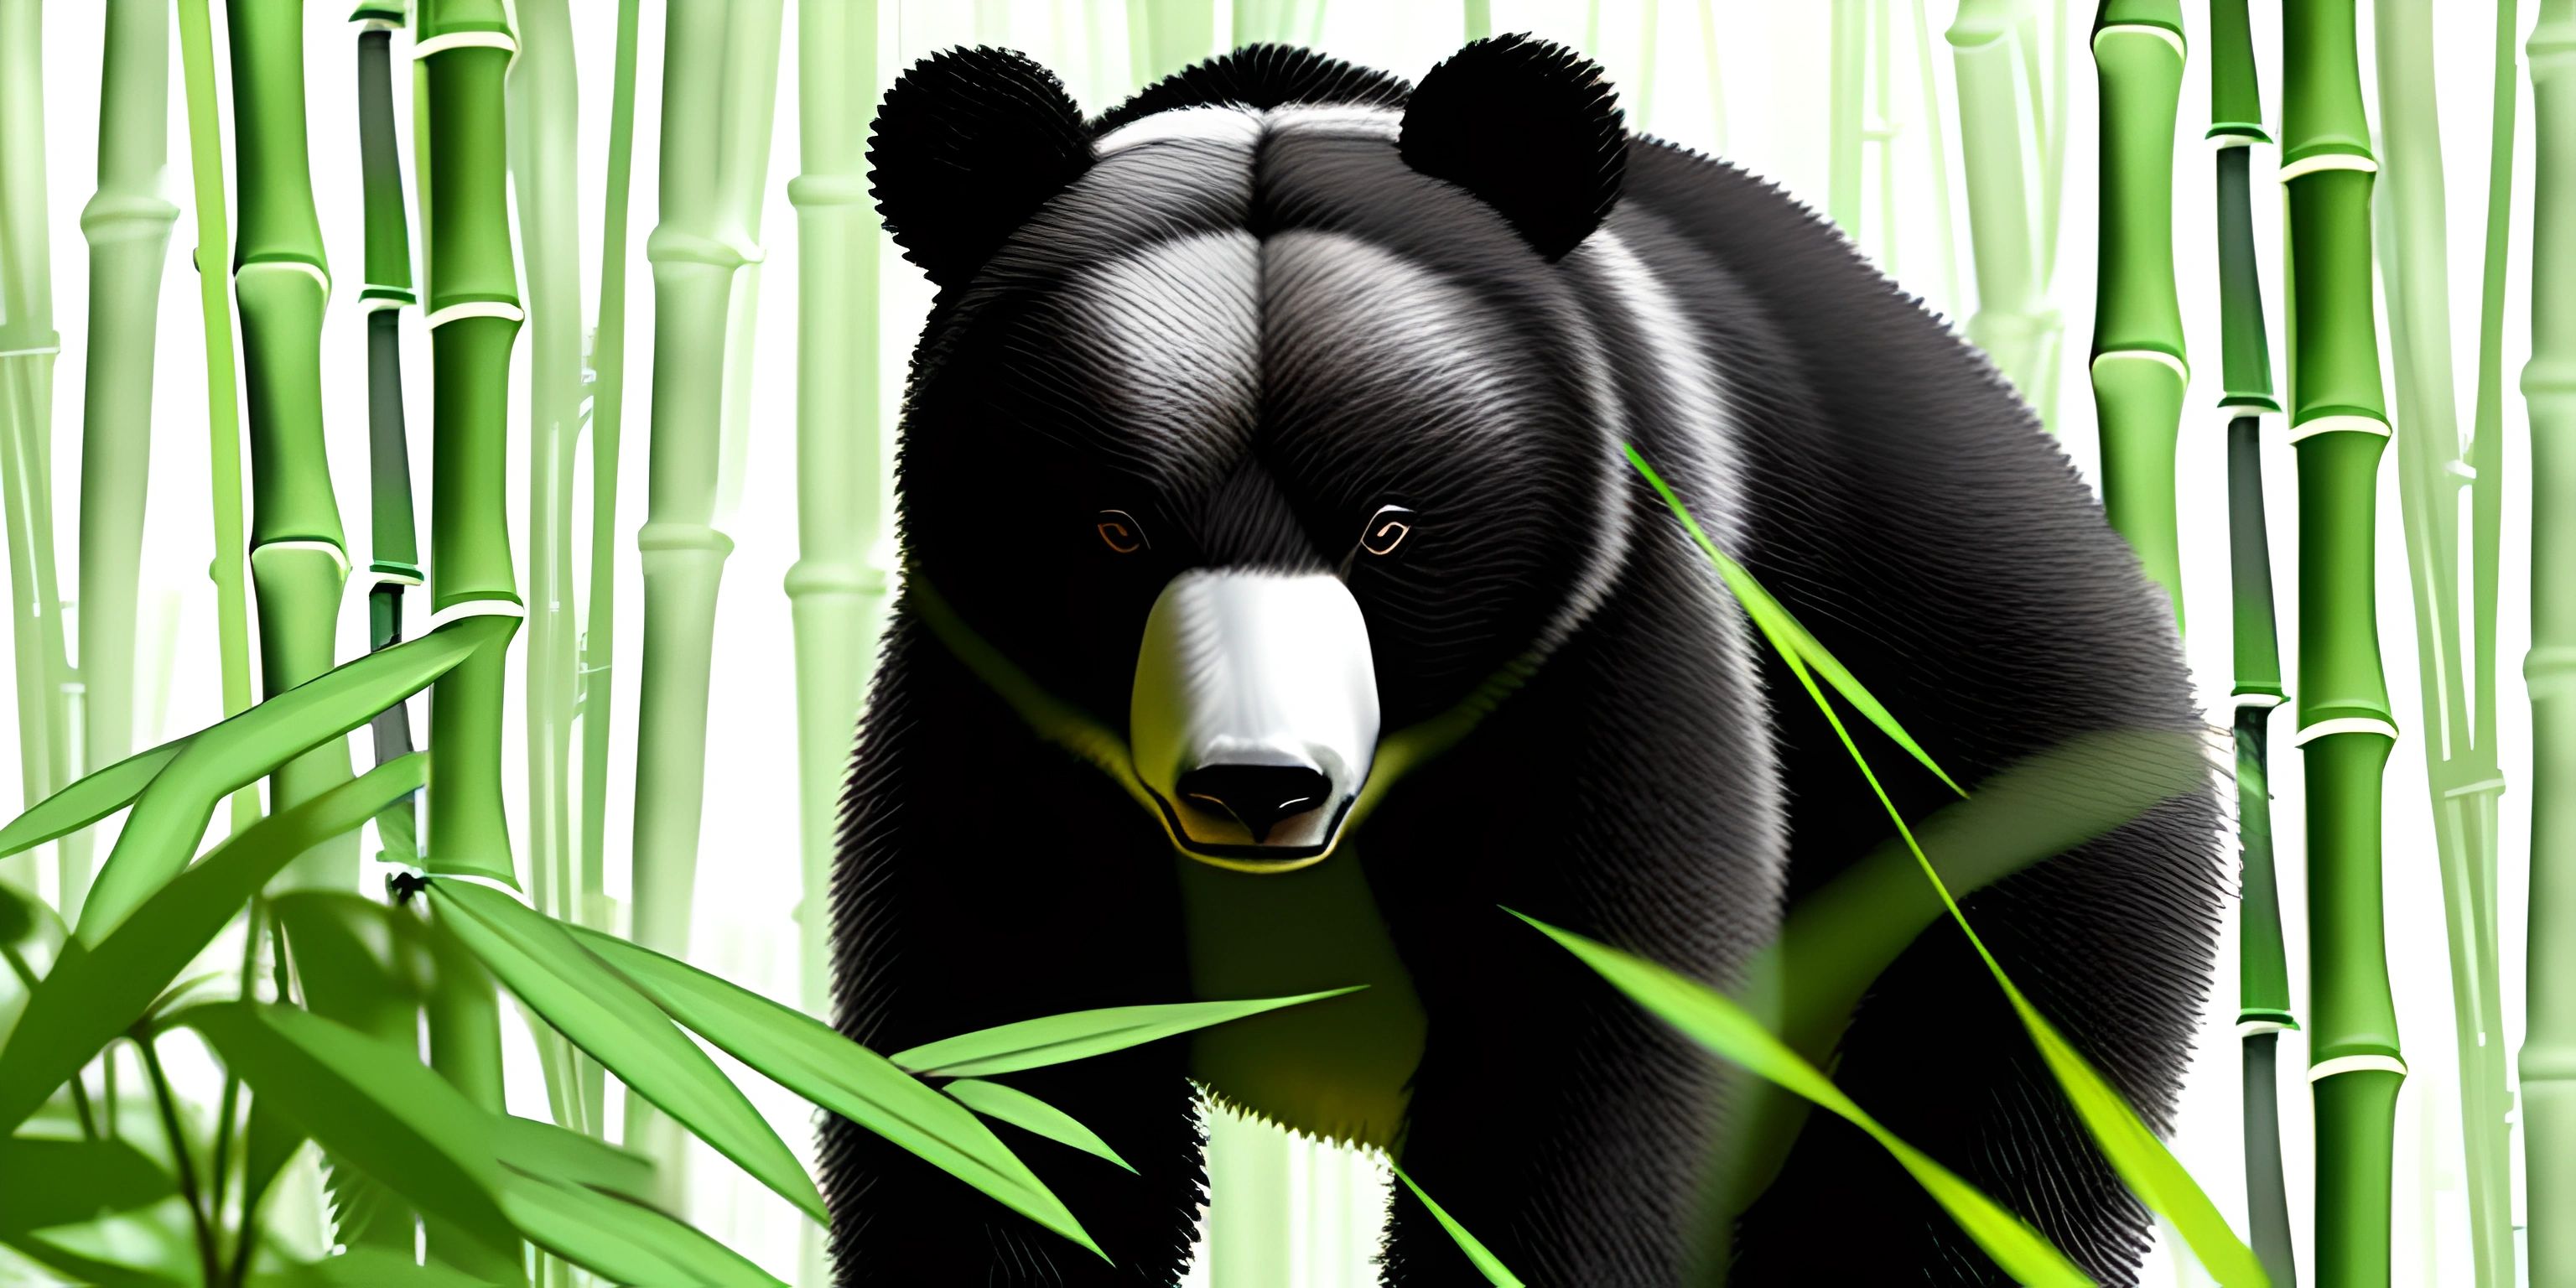 a painting of a bear that is walking in the grass among bambooss in a forest